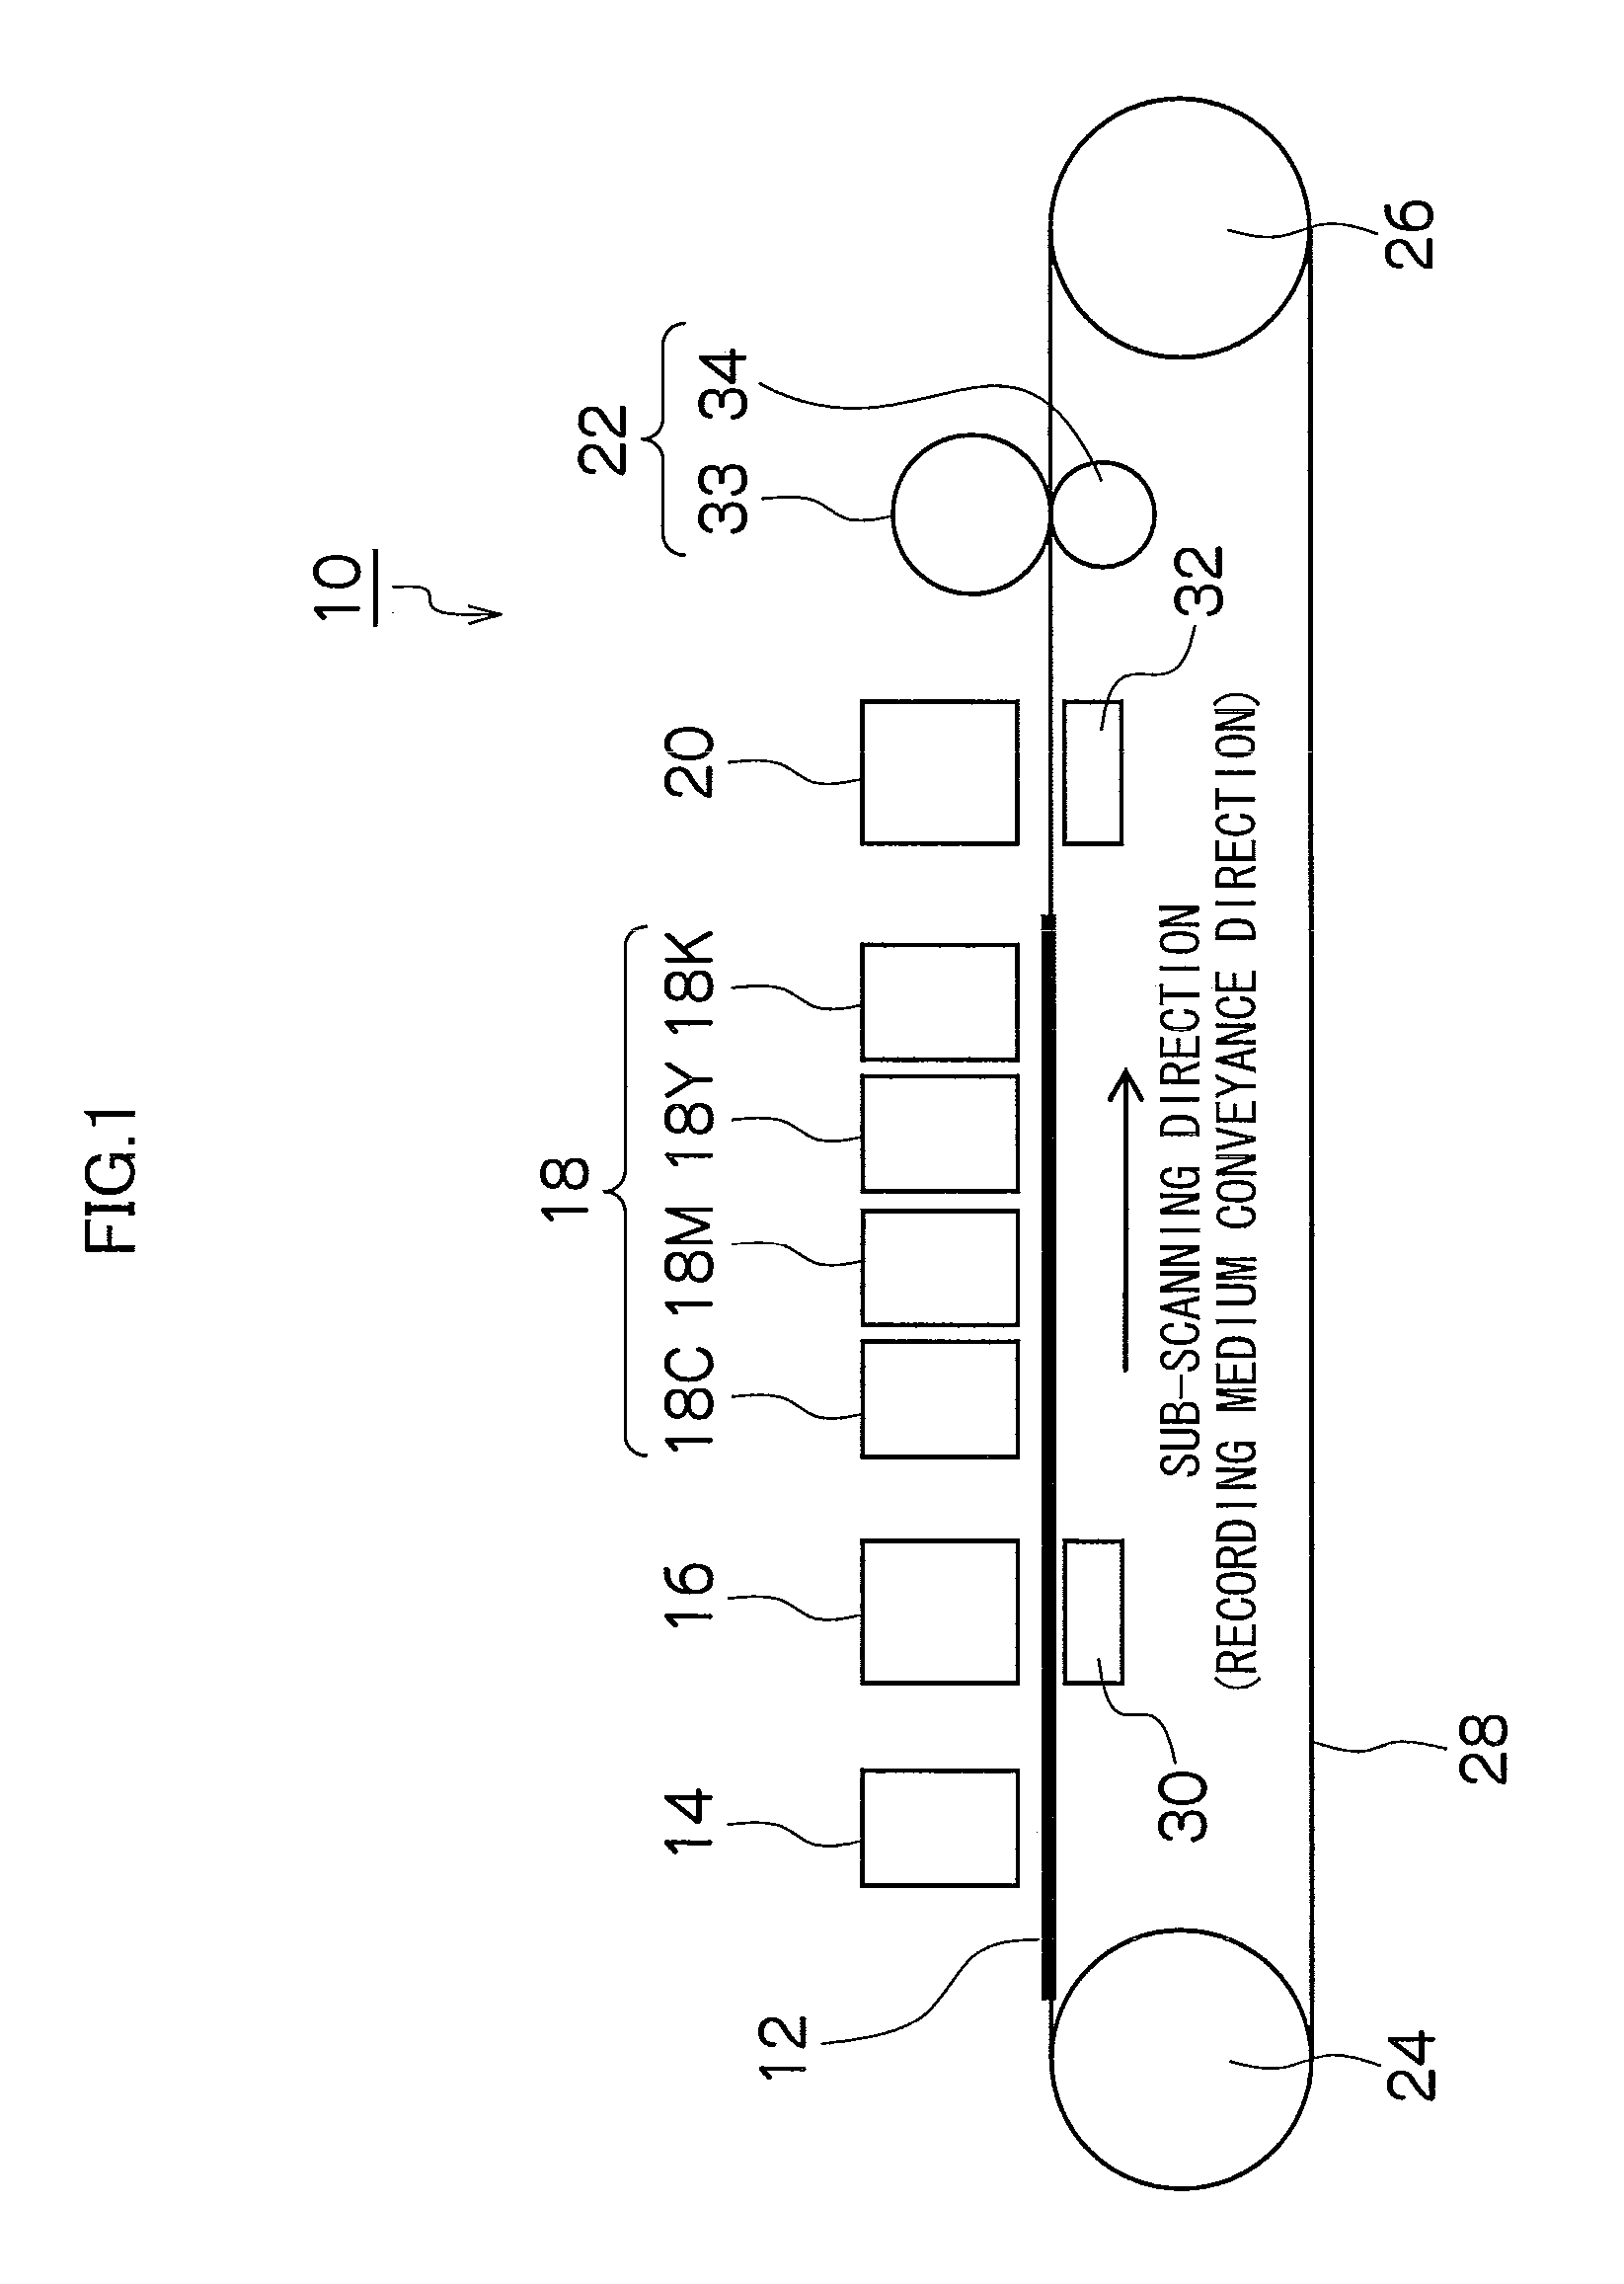 Image forming method and apparatus